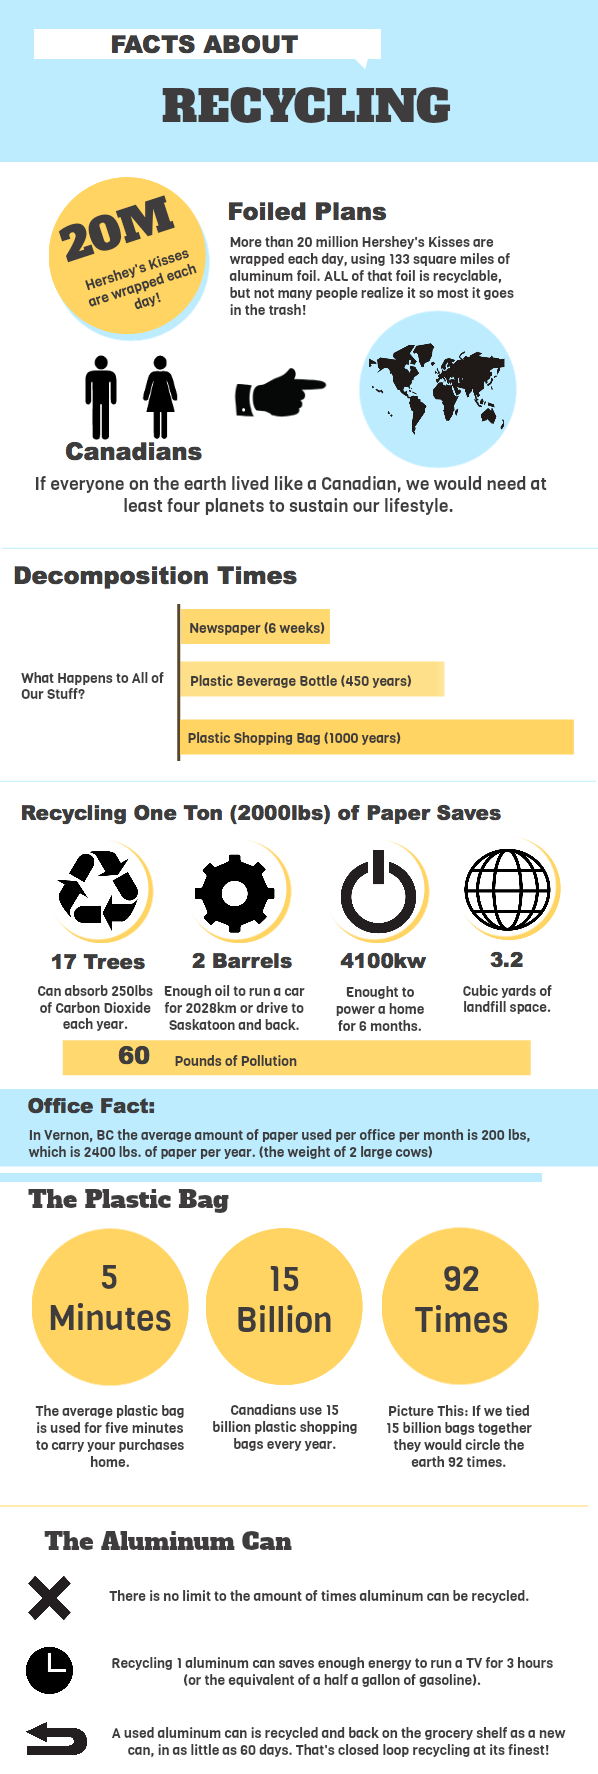 Facts About Recycling Infographic